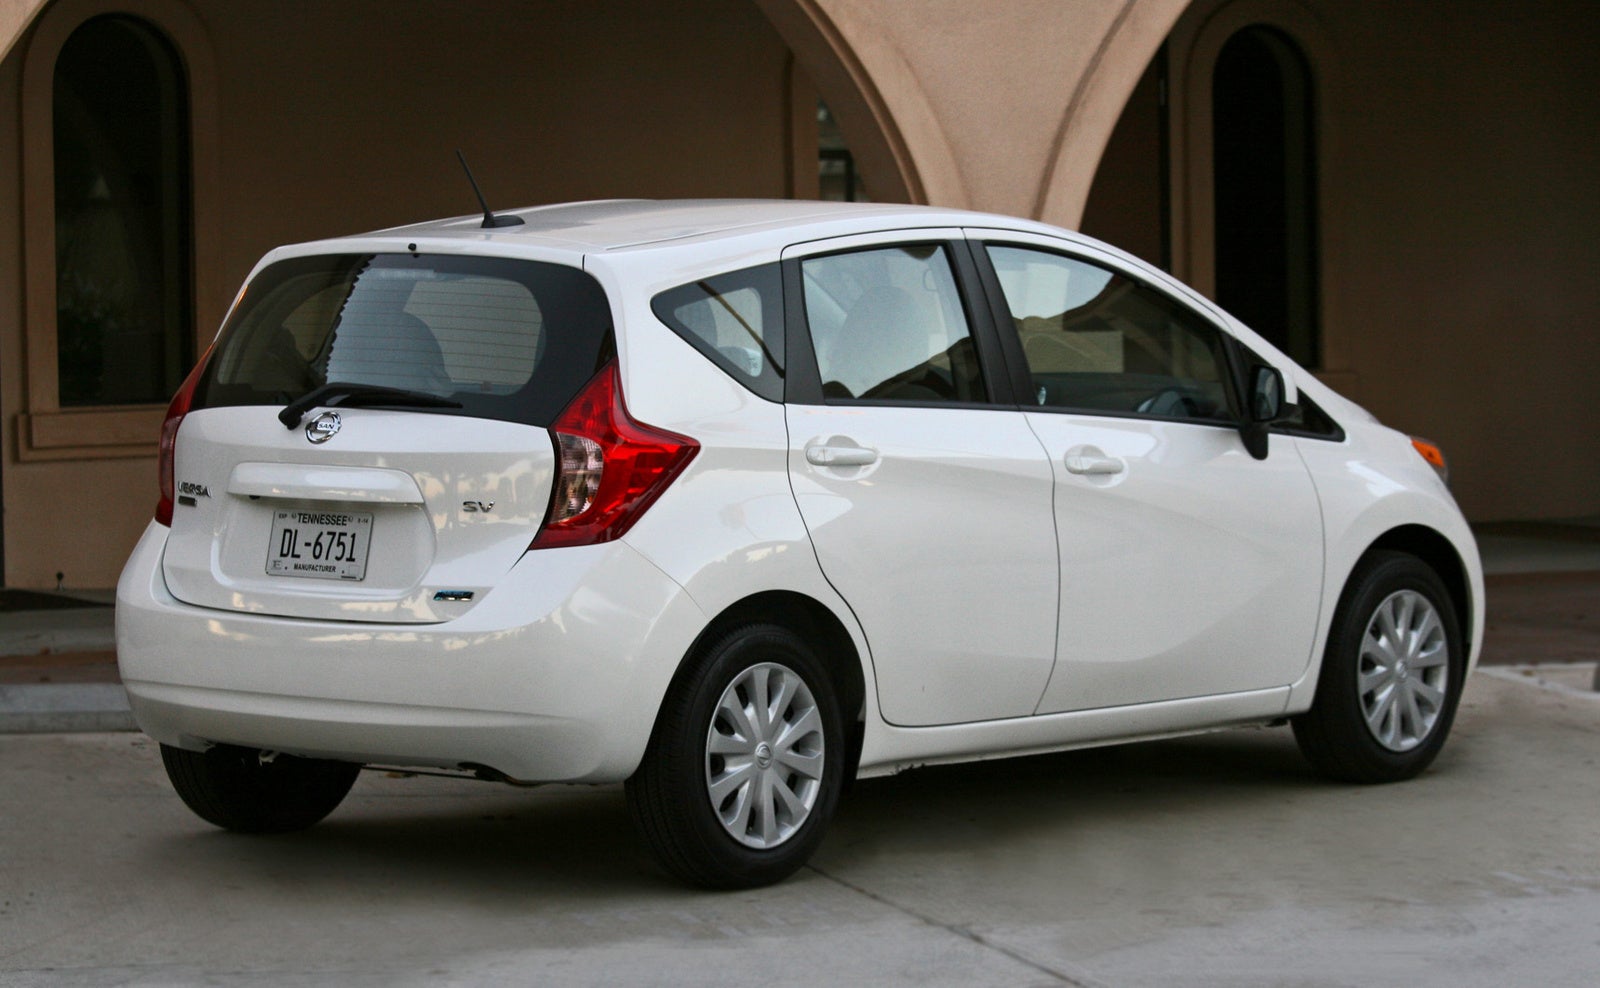 2014 Nissan versa note safety ratings #2